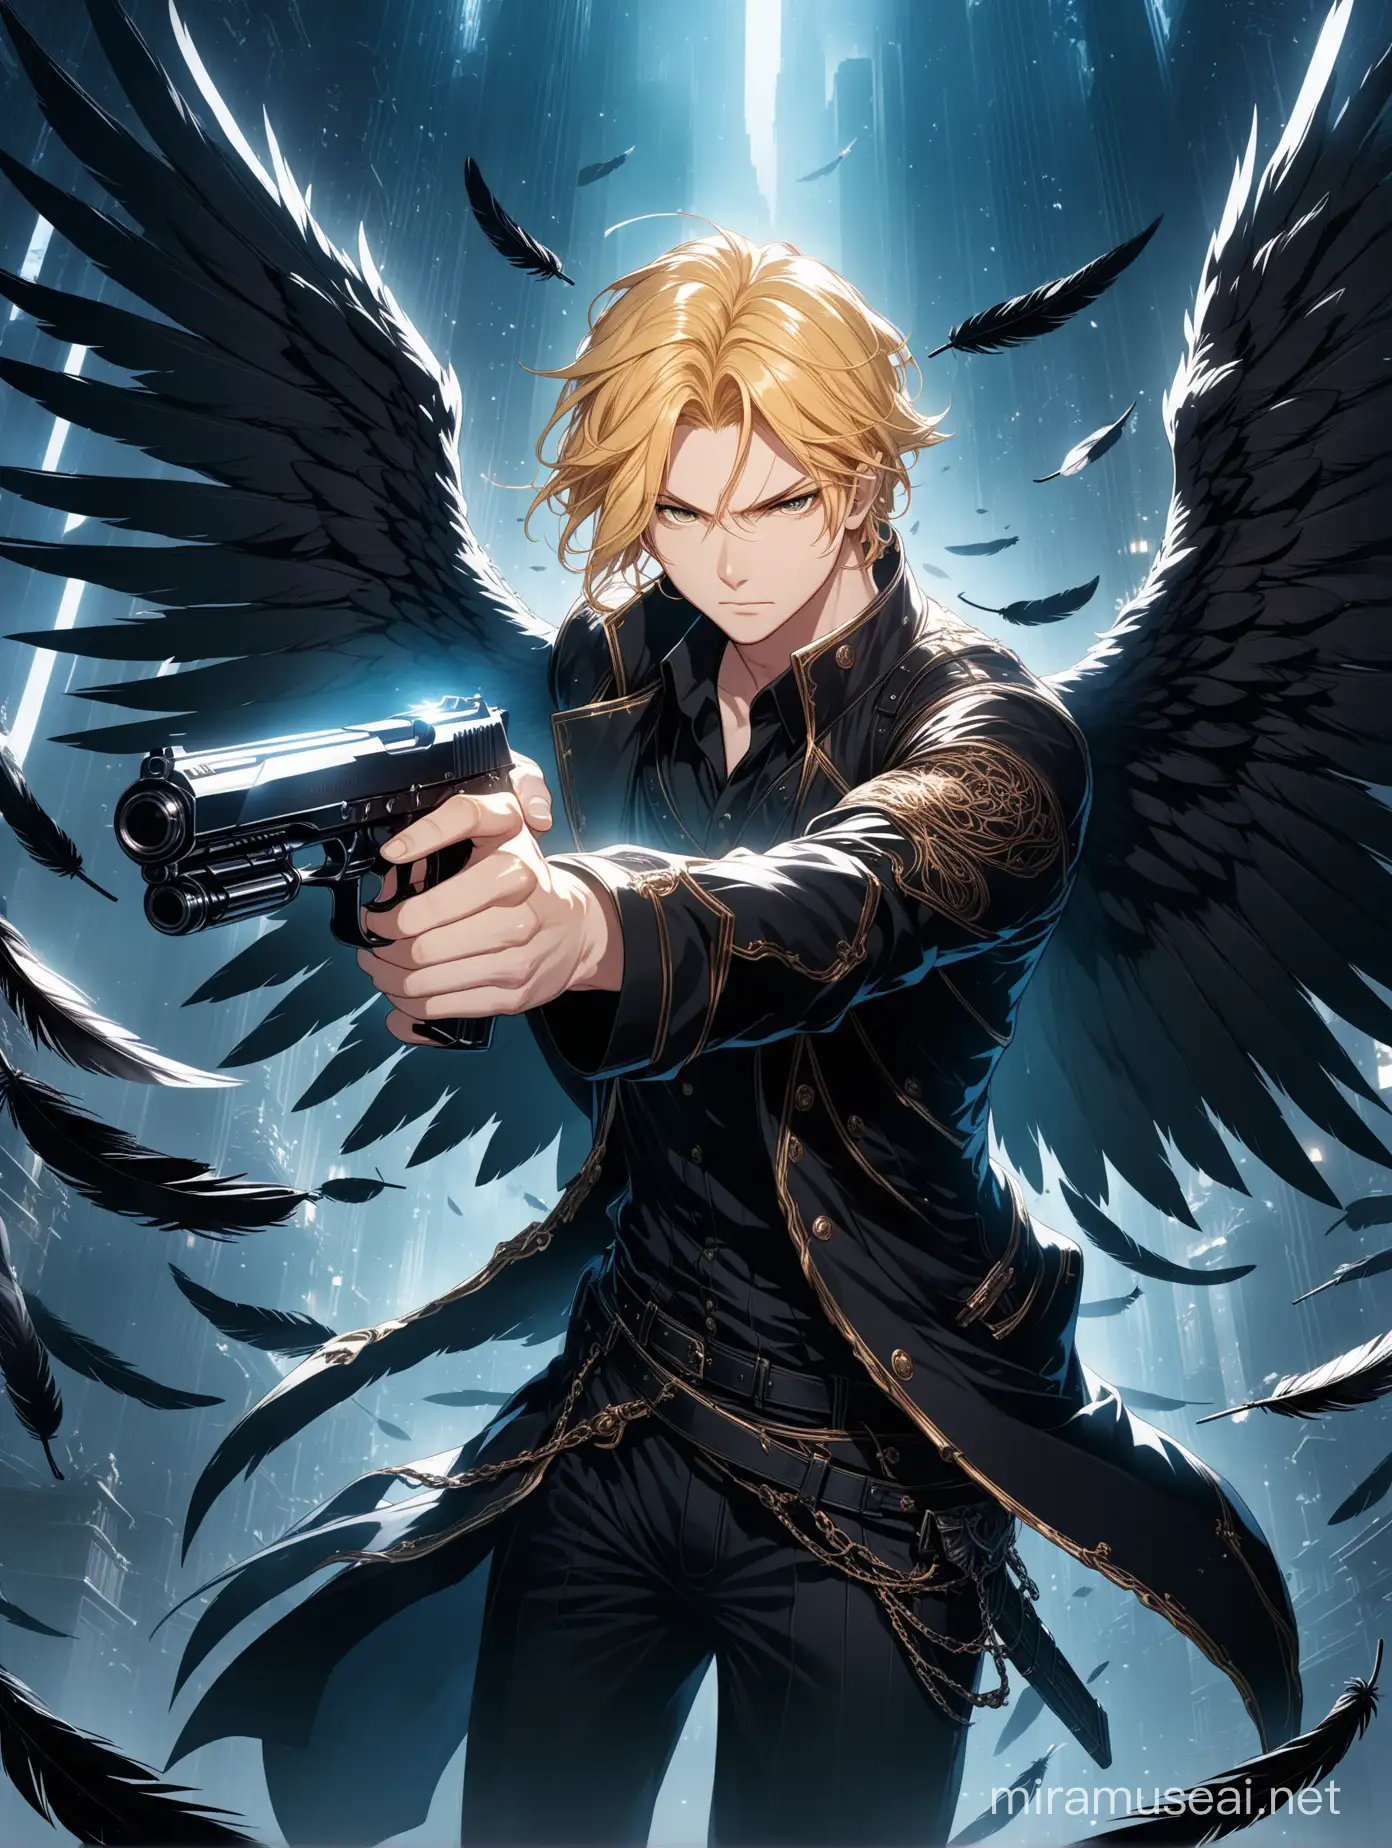 Grim Stylized Anime Fallen Angel with Gun in Dark Night Surrounded by Feathers